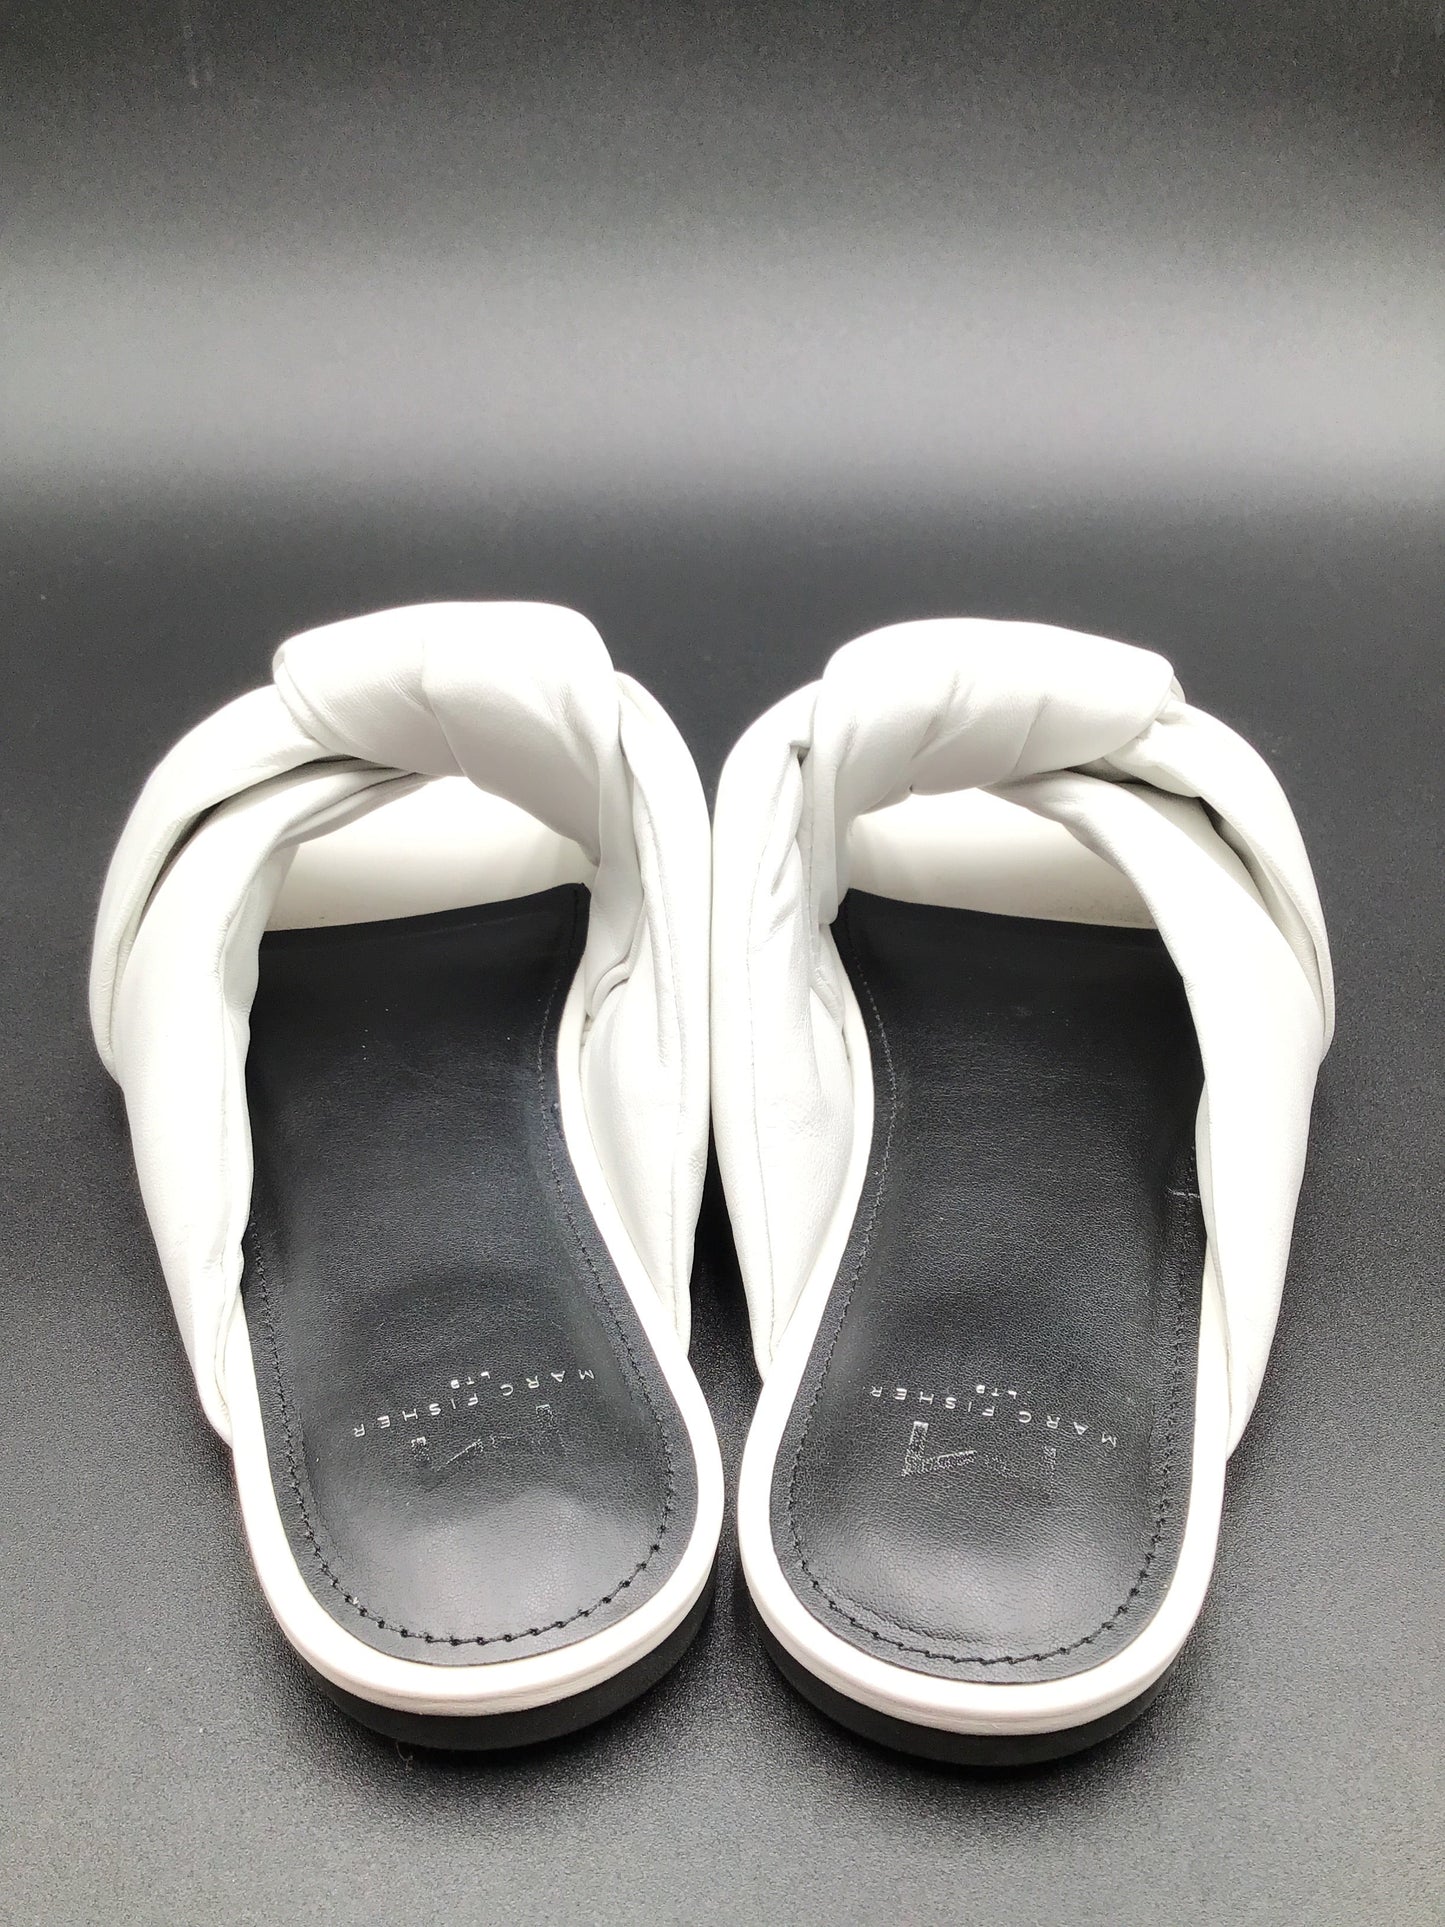 White Sandals Flats Marc Fisher, Size 9